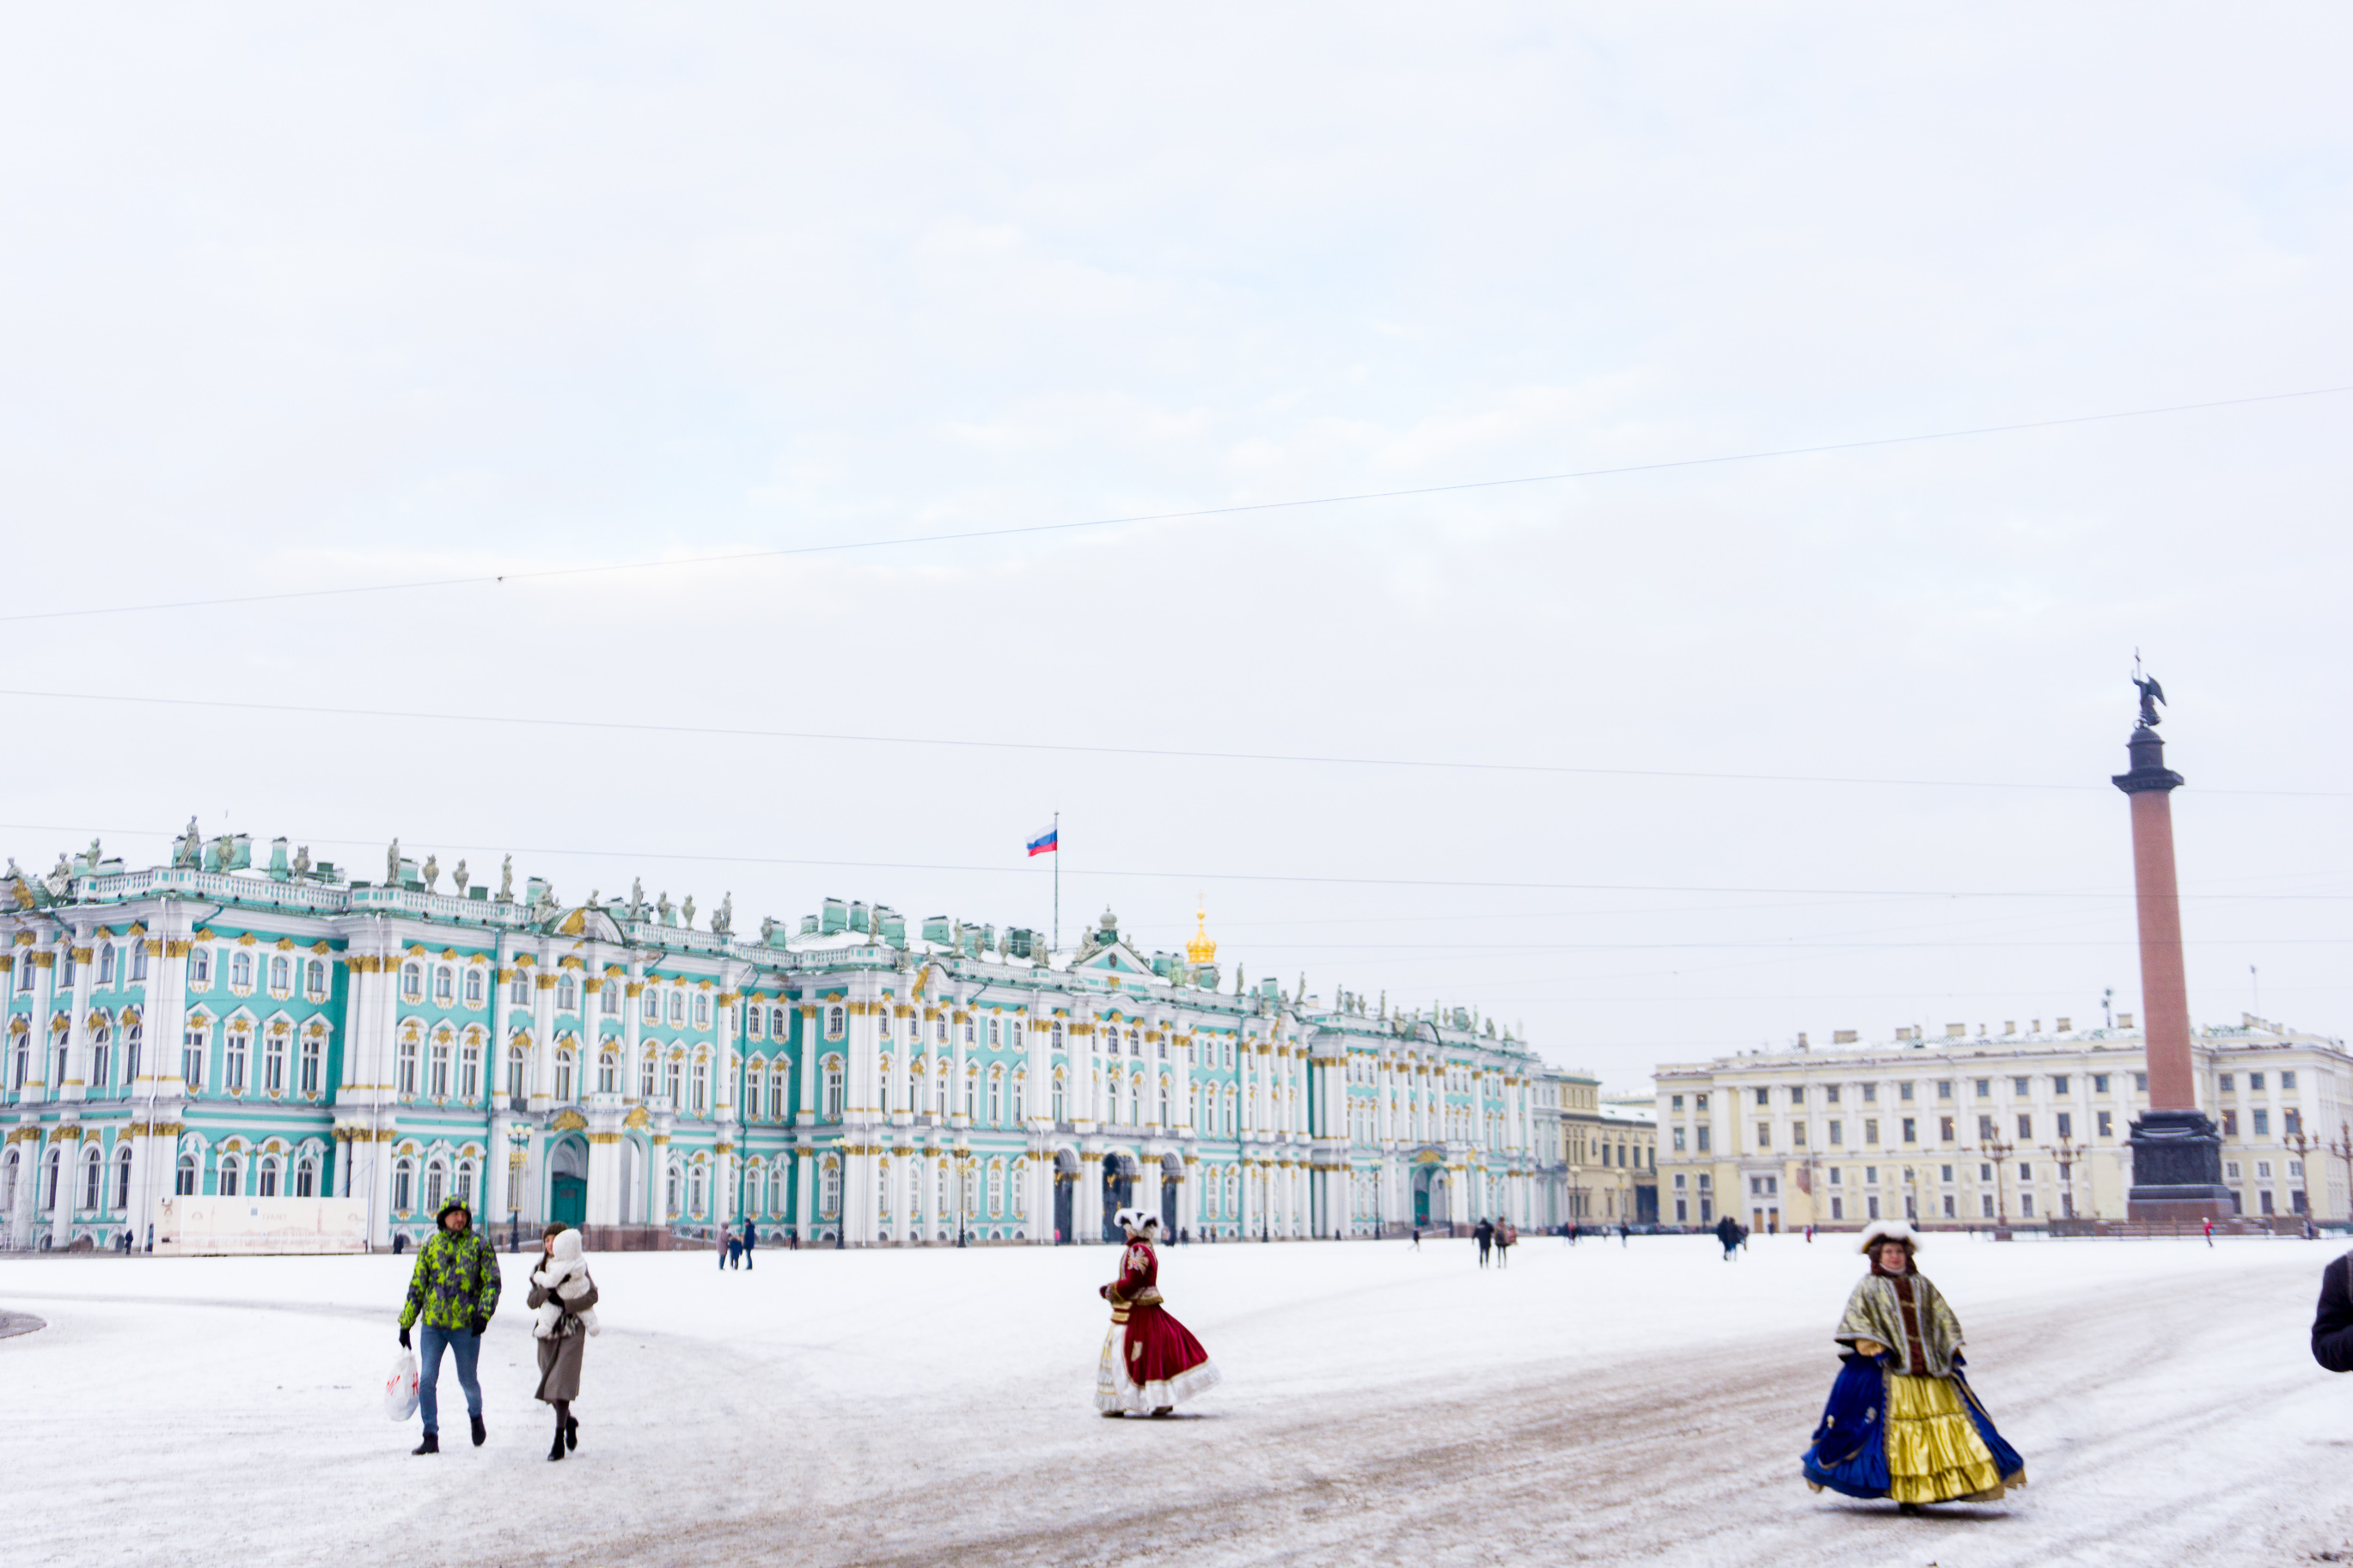 Winter Palace and Hermitage Museum